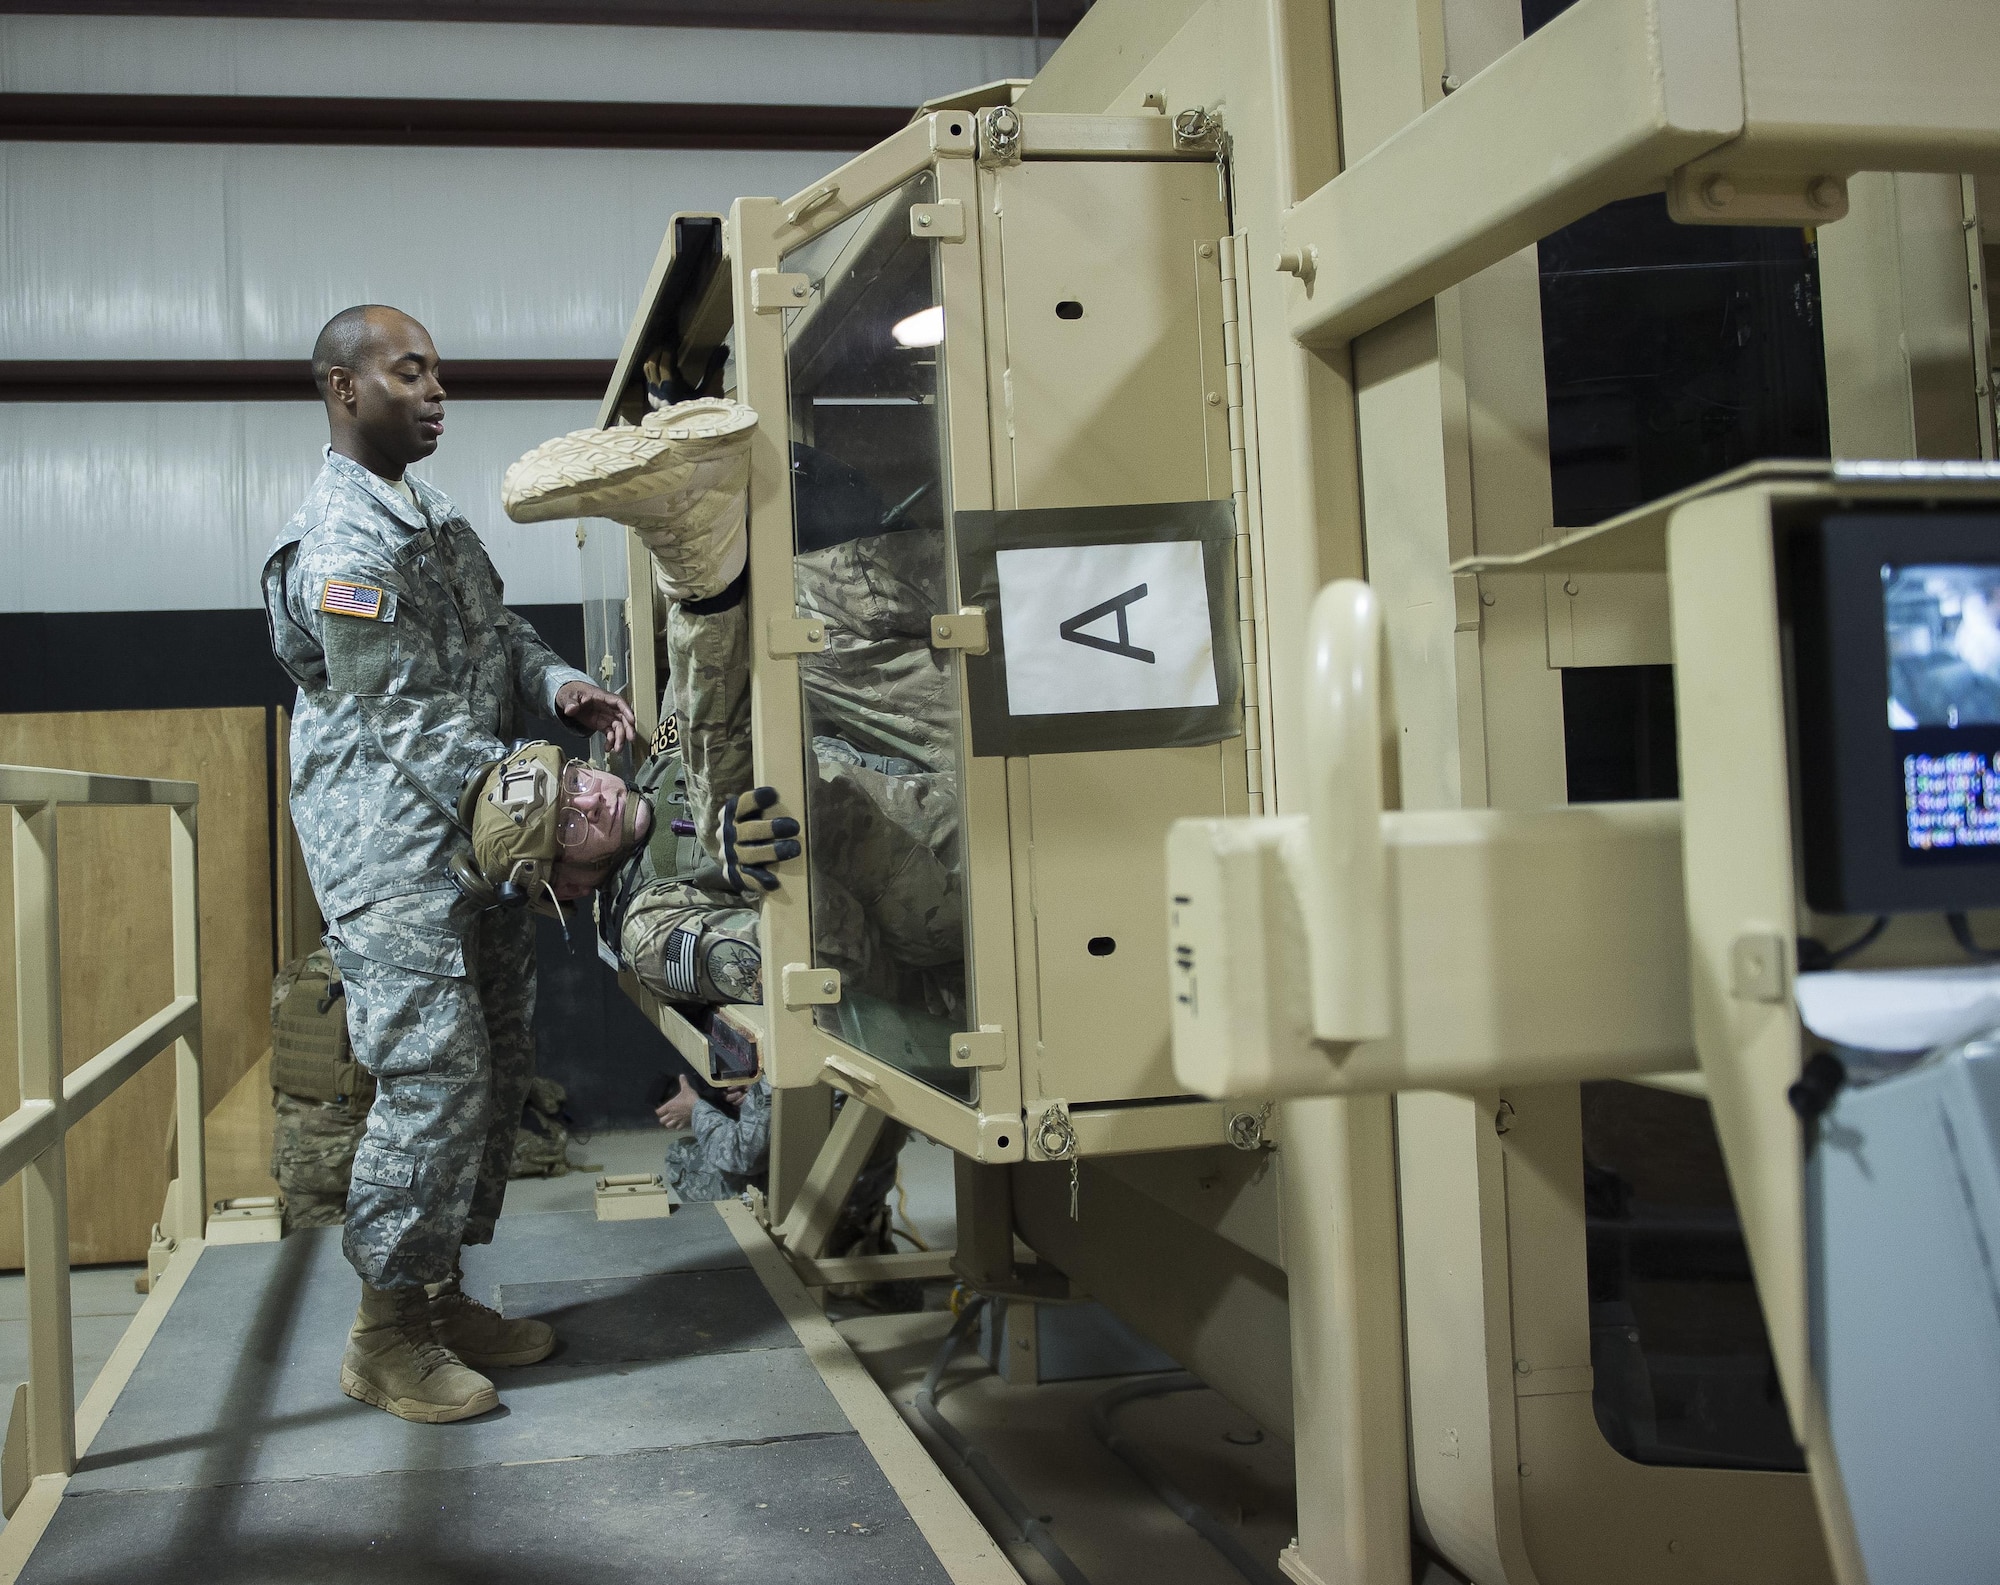 Sgt. 1st Class Ken Shirley, a Humvee egress instructor at the McCrady Battle Simulation Center, assists a combat camera Airman March 3, 2016, during exercise Scorpion Lens 2016, at McCrady Training Center on Fort Jackson, S.C. The exercise is an annual training requirement incorporating combat camera job qualification standards and advanced weapons and tactical training with Army instructors. (U.S. Air Force photo/Staff Sgt. Jared Trimarchi)